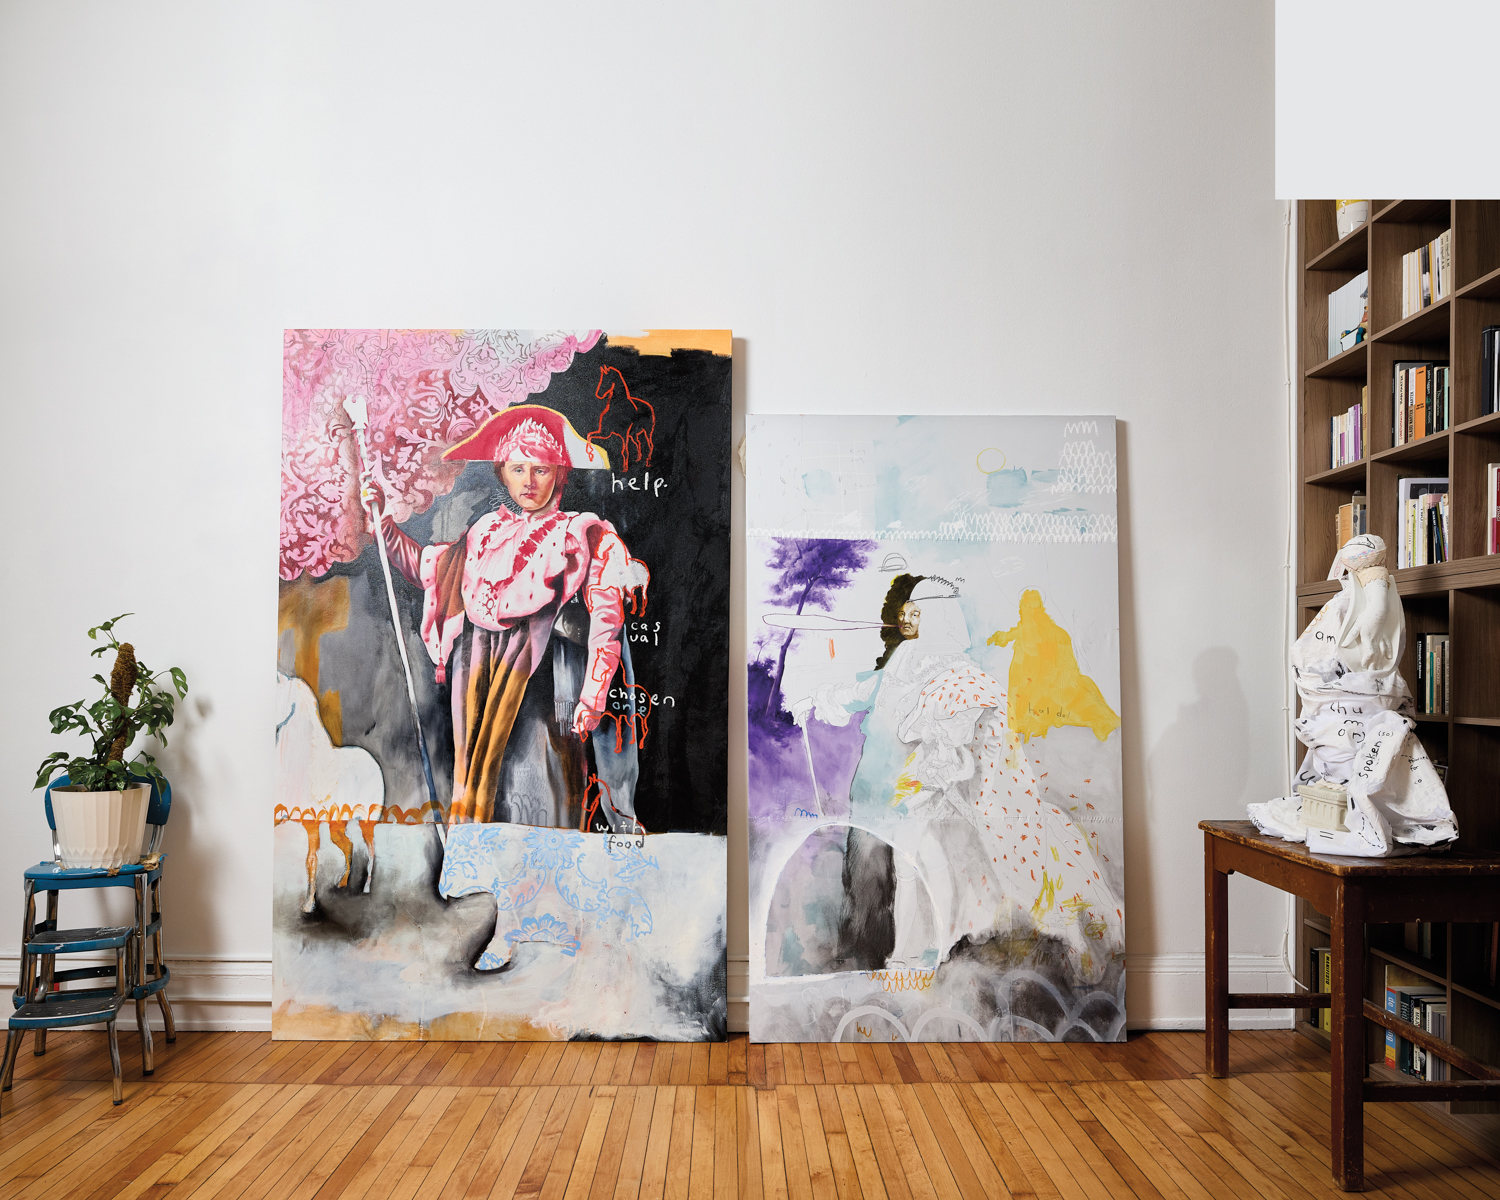 Two historically inspired oil paintings leaning against a wall